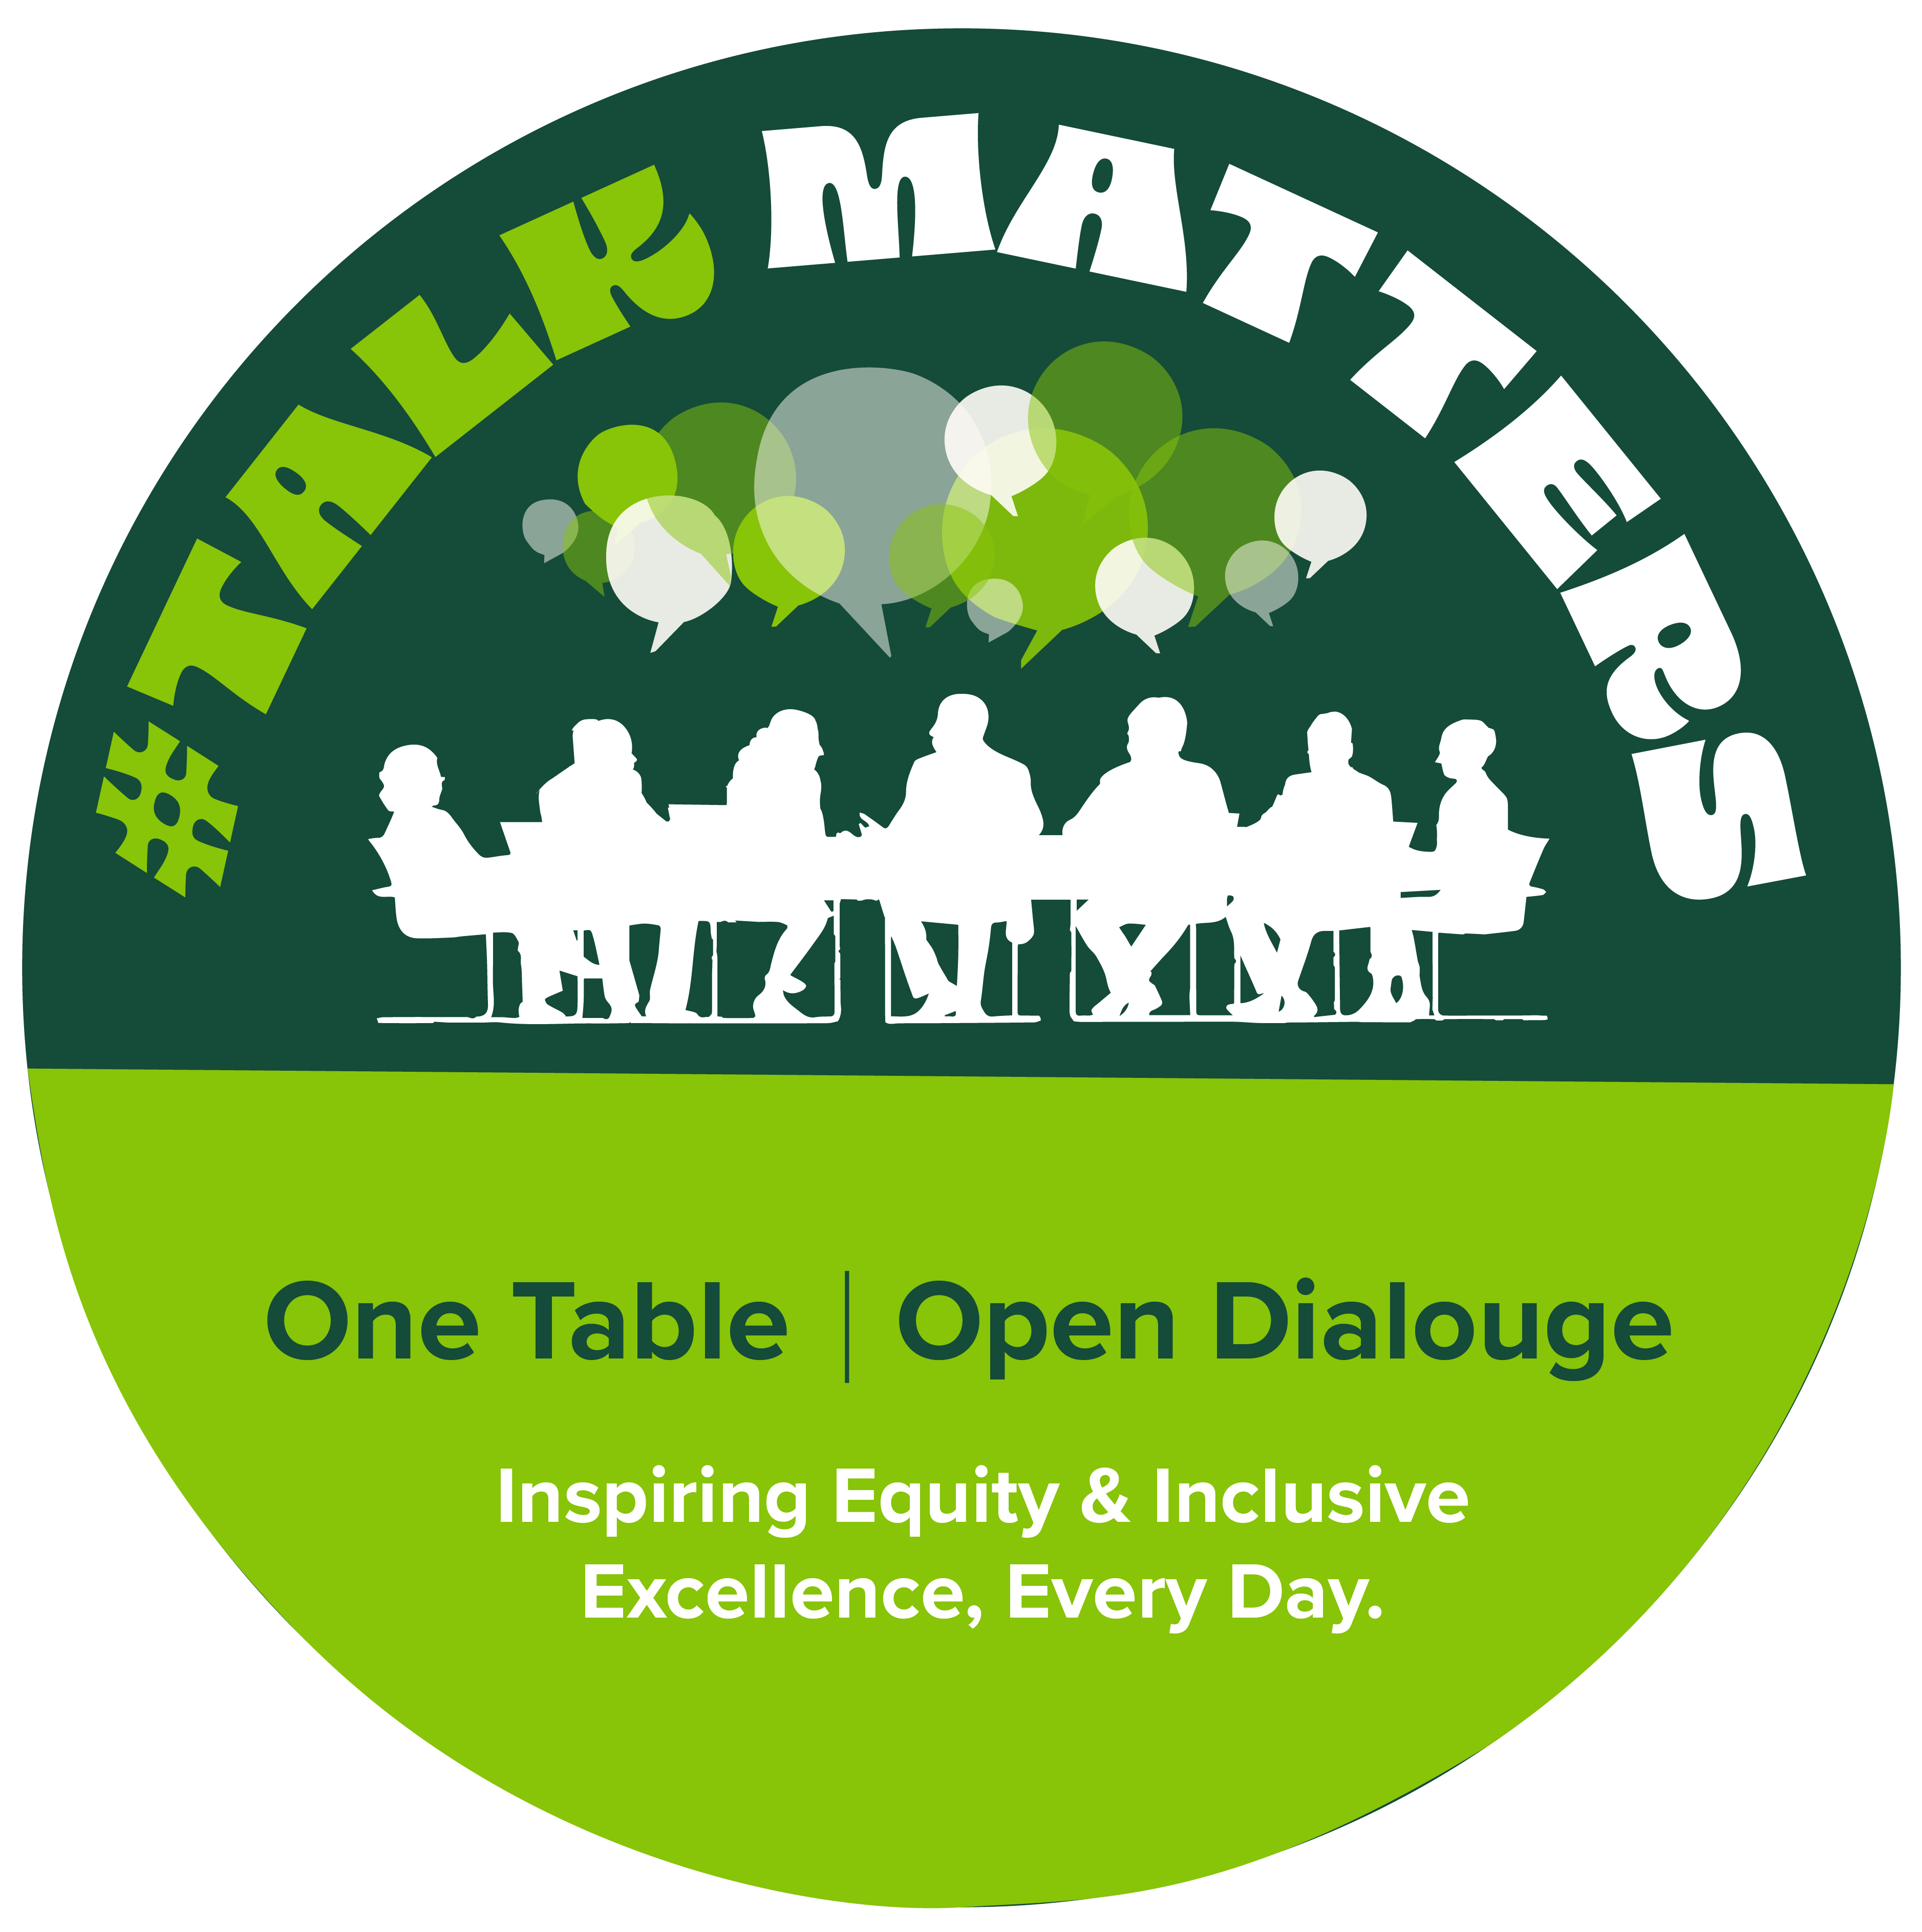 #TalkMatters: New Initiative to Focus on Critical Dialogues